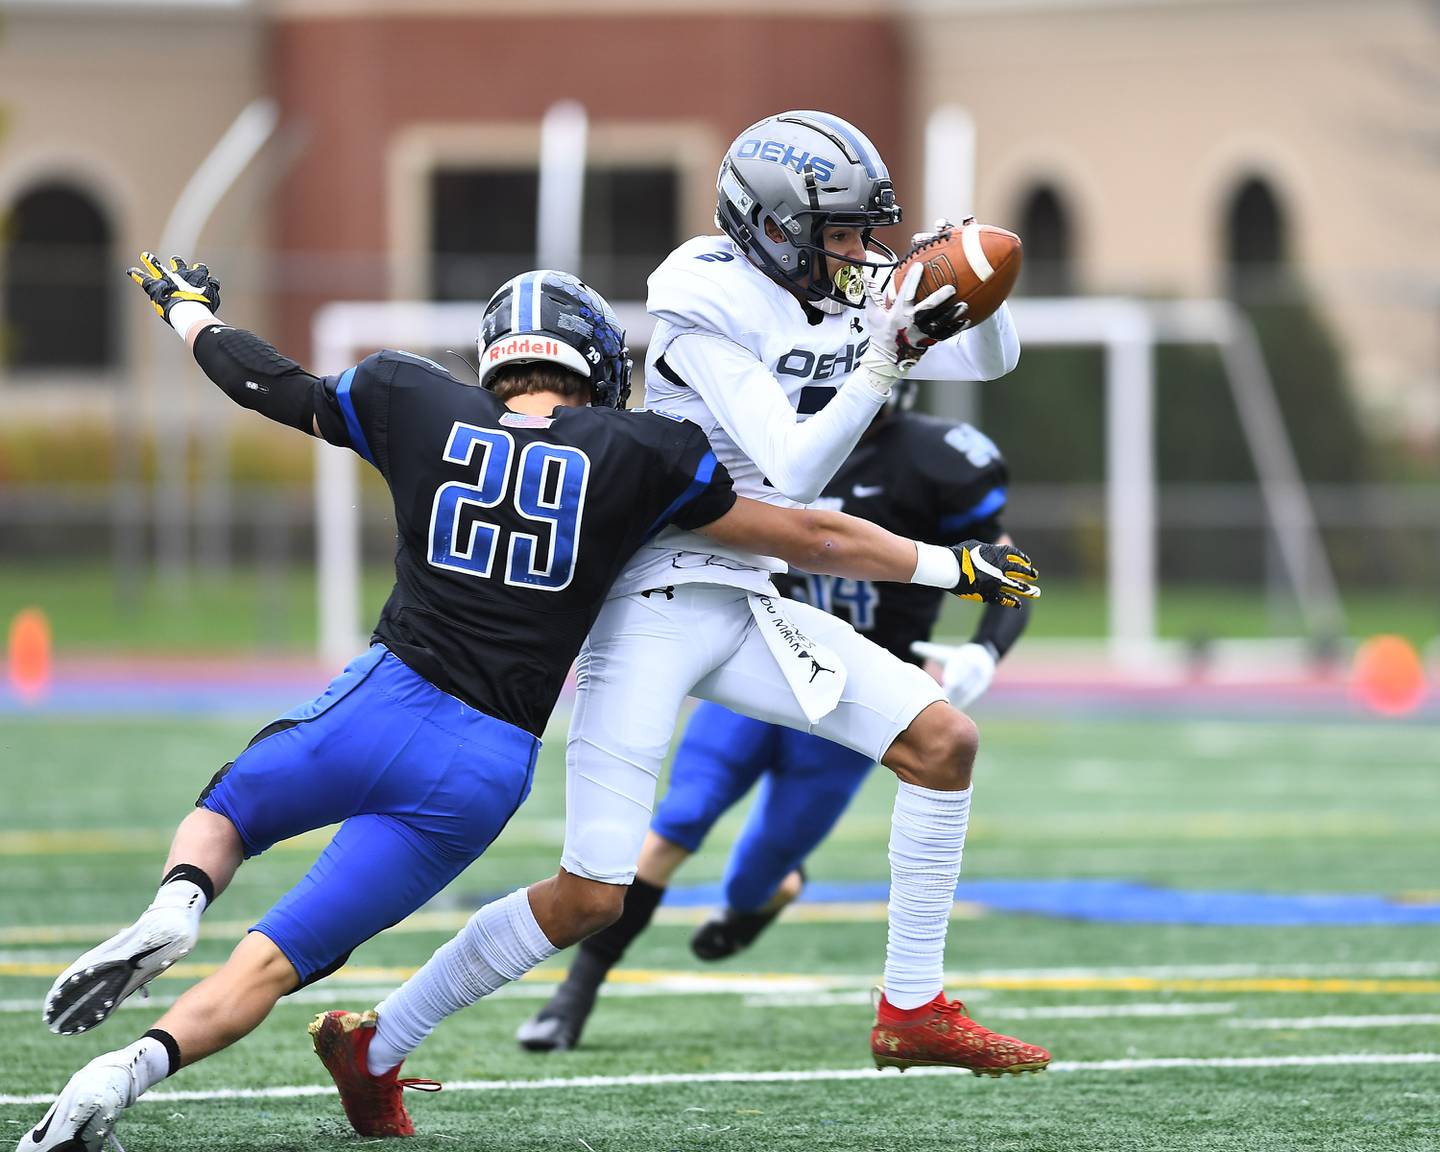 Lincoln-Way East's Dj Ritter (29) wraps up Oswego East's wide receiver Ty Carlson (2) after making the catch on Saturday, Oct. 30, 2021, at Lincoln-Way East High School in Frankfort.